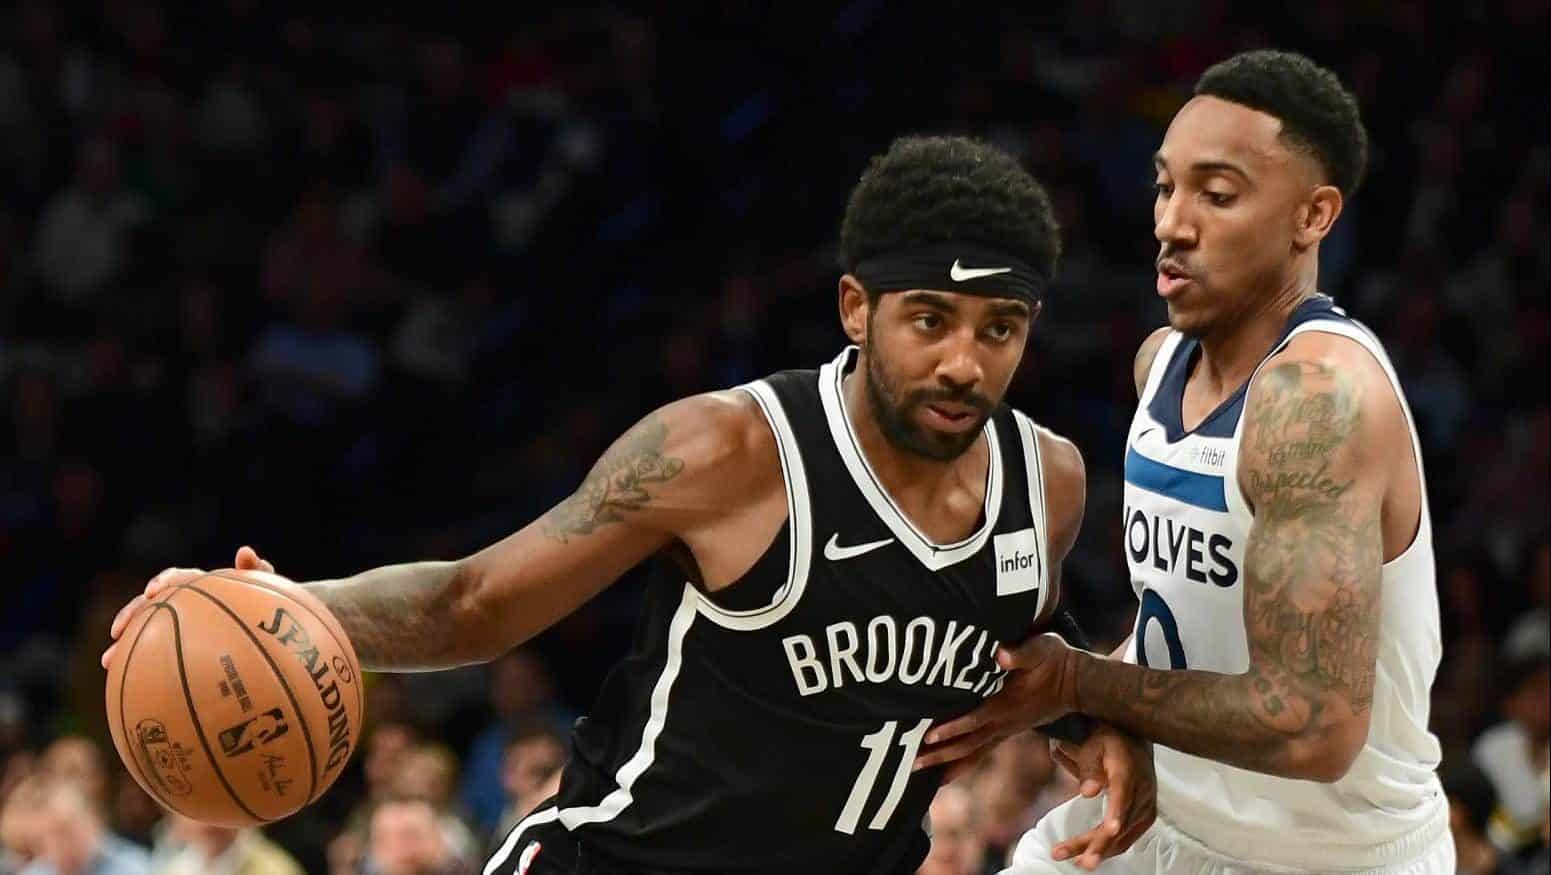 NEW YORK, NEW YORK - OCTOBER 23: Jeff Teague #0 of the Minnesota Timberwolves guards Kyrie Irving #11 of the Brooklyn Nets as he dribbles the ball during the first half of their game at Barclays Center on October 23, 2019 in the Brooklyn borough of New York City. NOTE TO USER: User expressly acknowledges and agrees that, by downloading and or using this photograph, User is consenting to the terms and conditions of the Getty Images License Agreement.